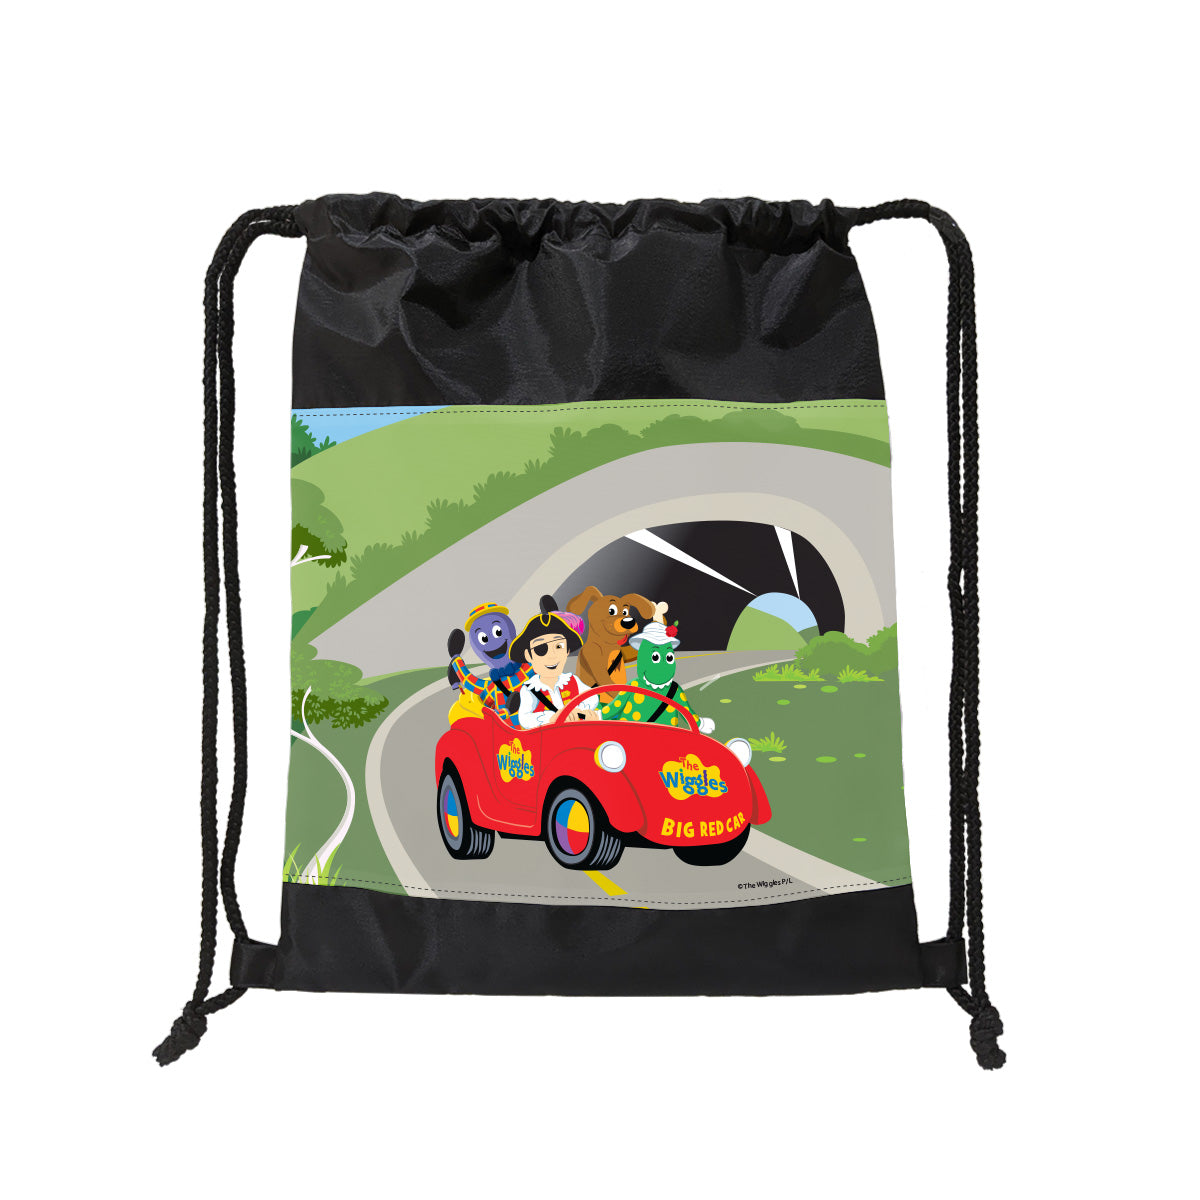 The Wiggles Travelling Drawstring Bag